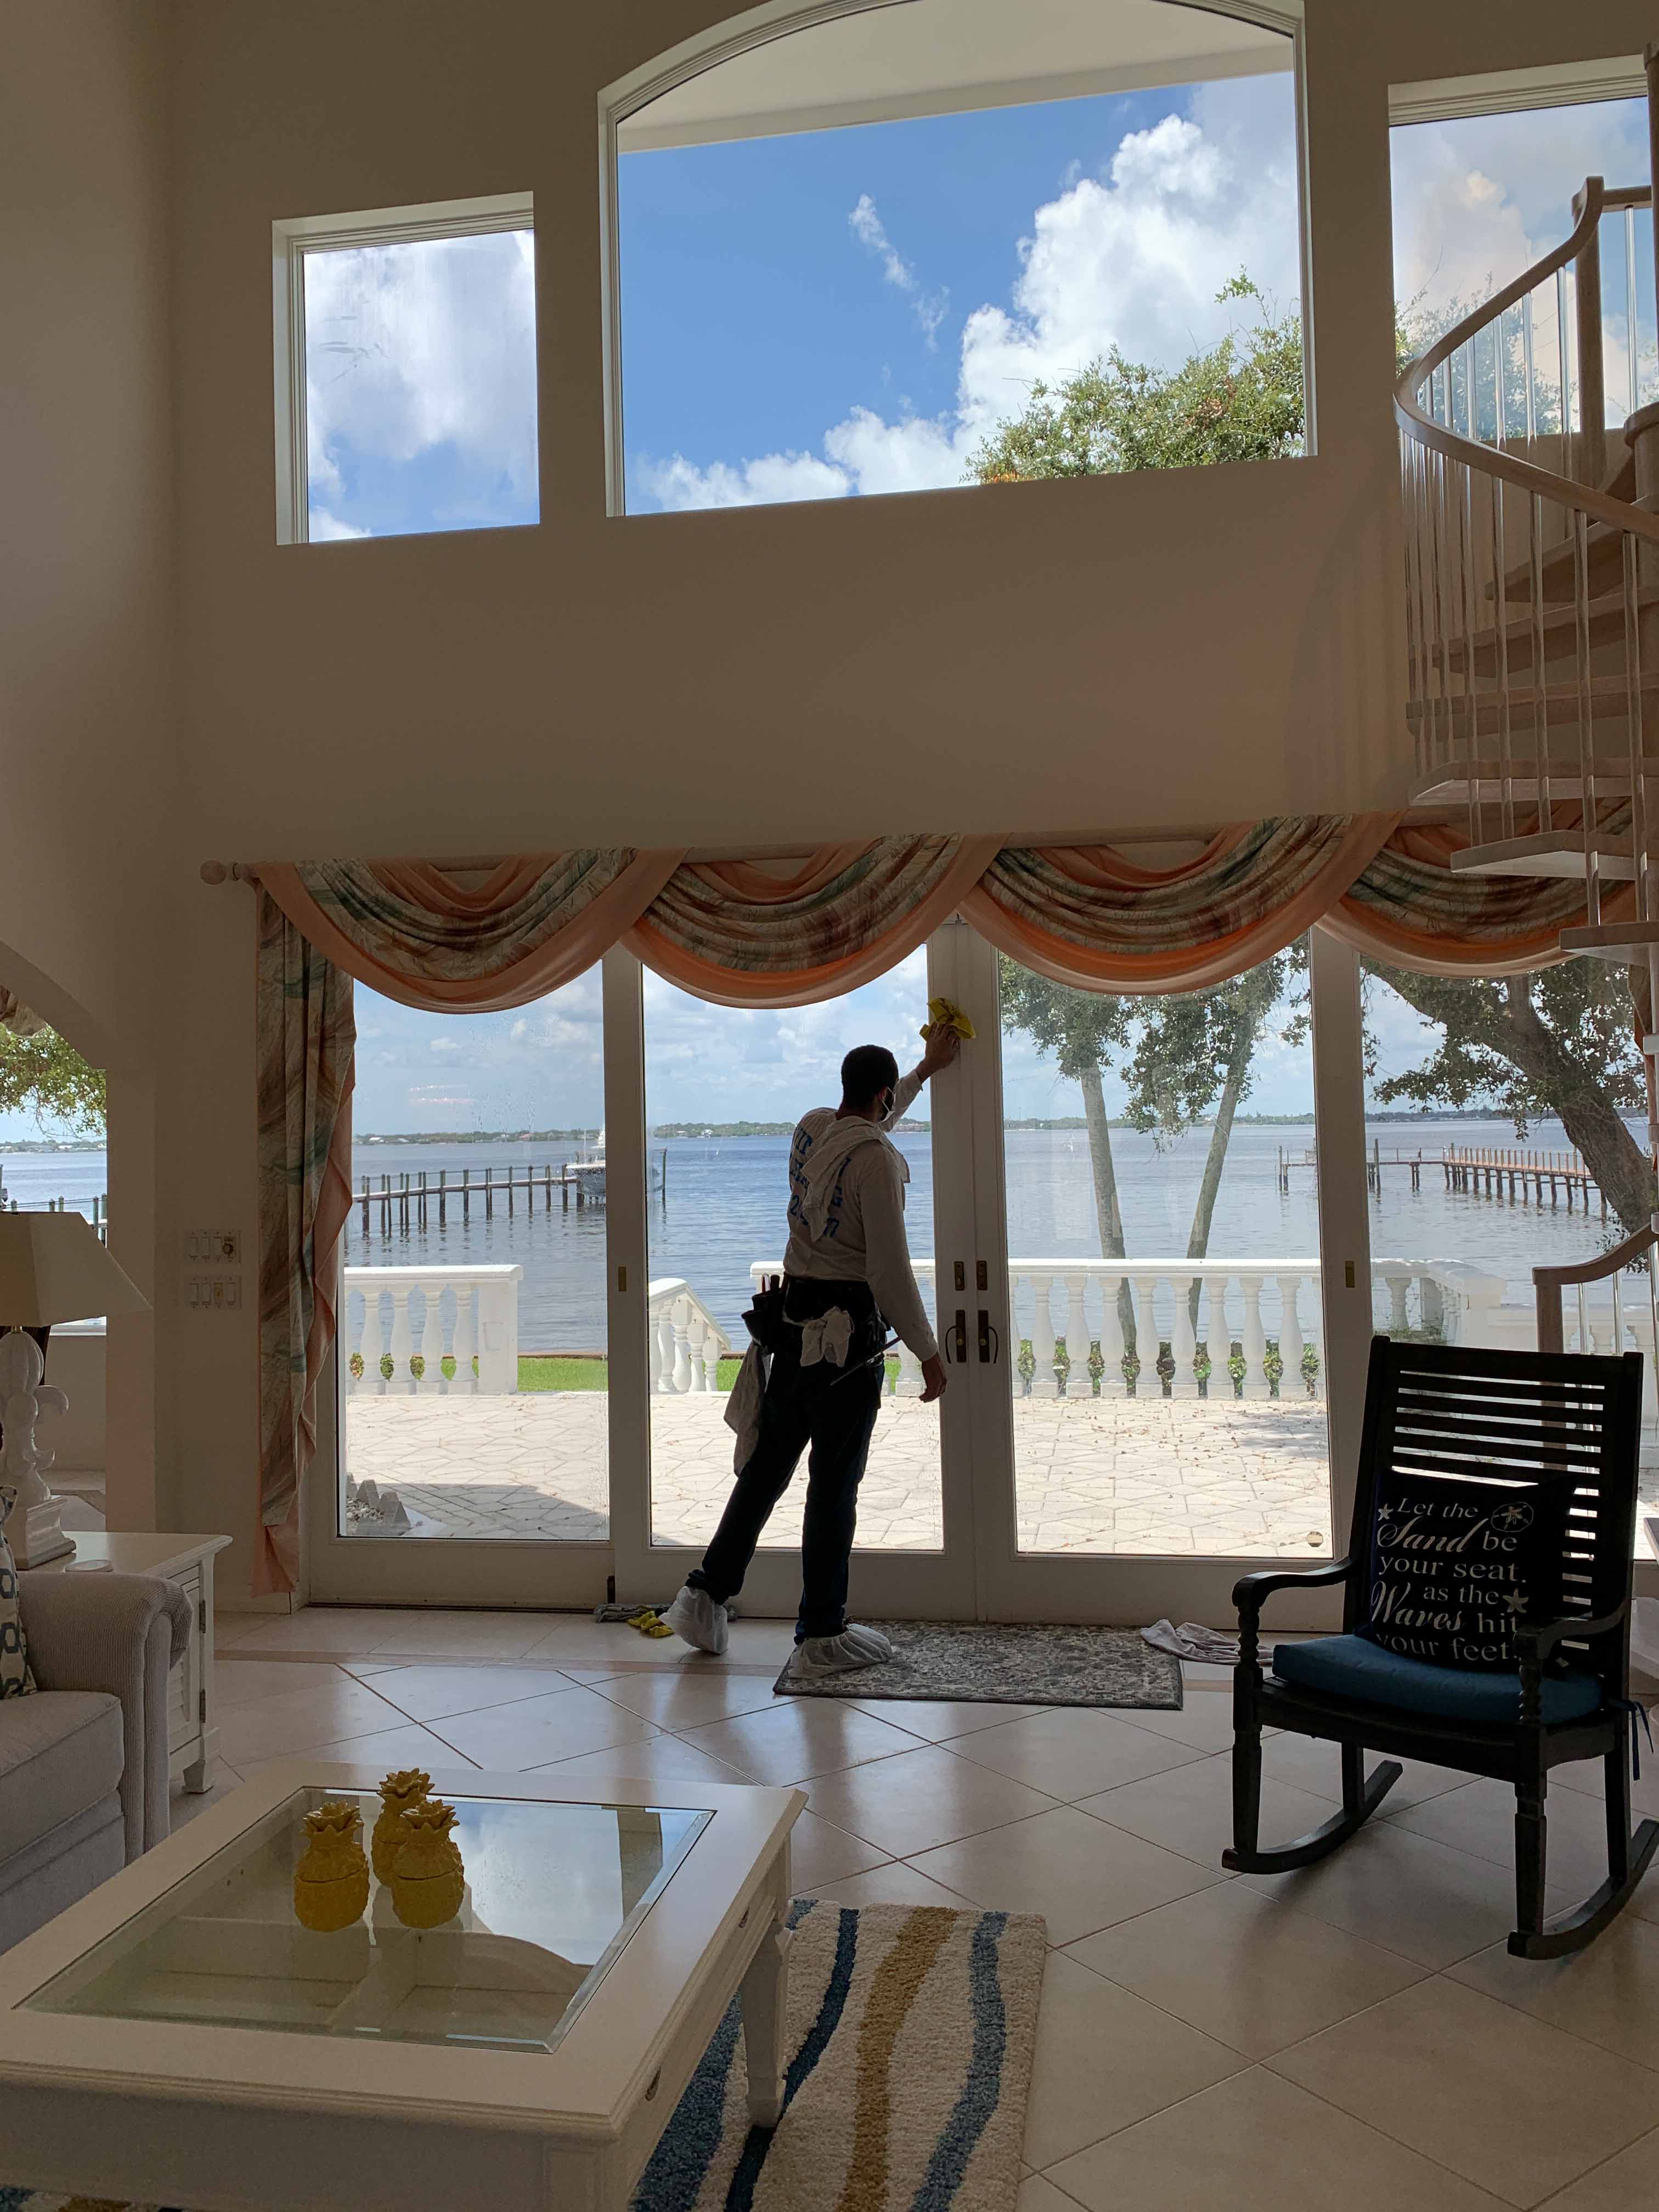 Window Cleaners in Hutchinson Island cleaning windows